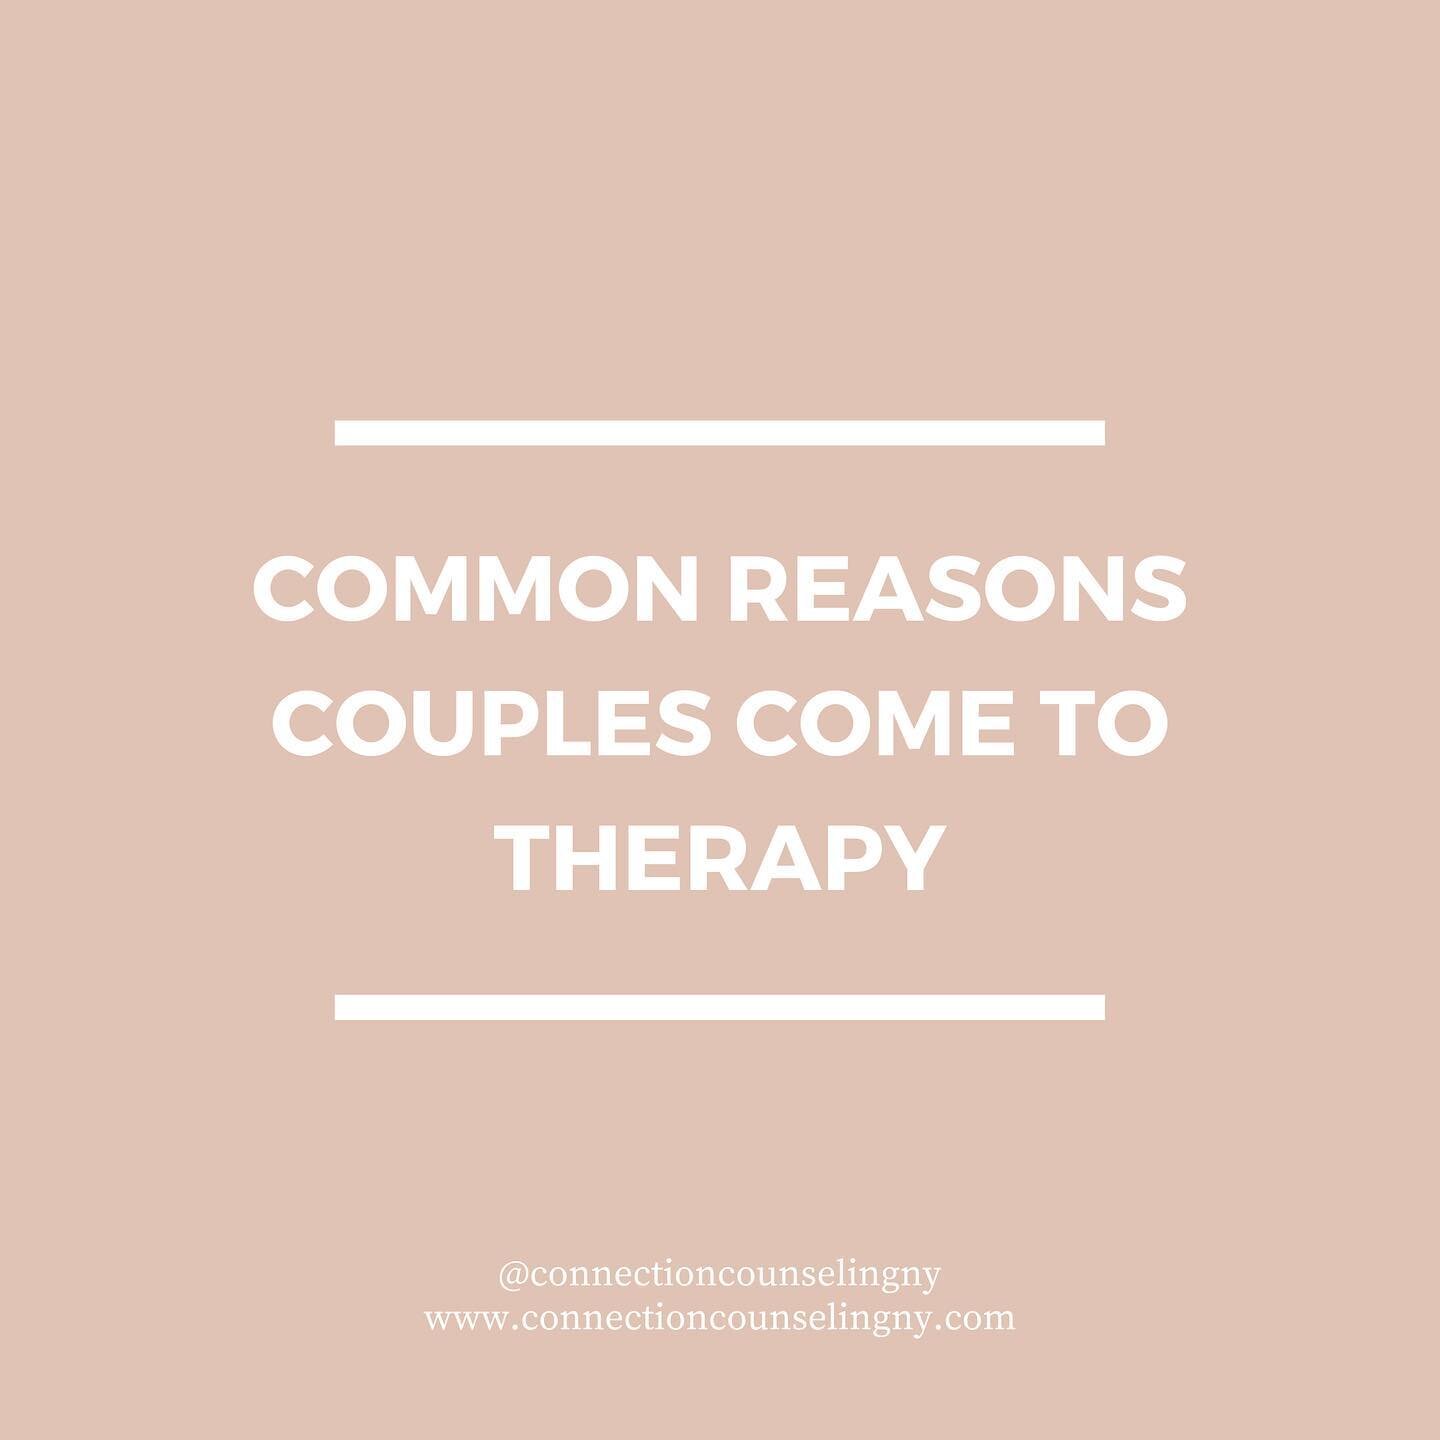 This is by no means an exhaustive list, it&rsquo;s just some of the more common reasons couples tell me that they&rsquo;re seeking to work with me.

I can go in depth breaking down each of these to include the differences and nuances of what &ldquo;r